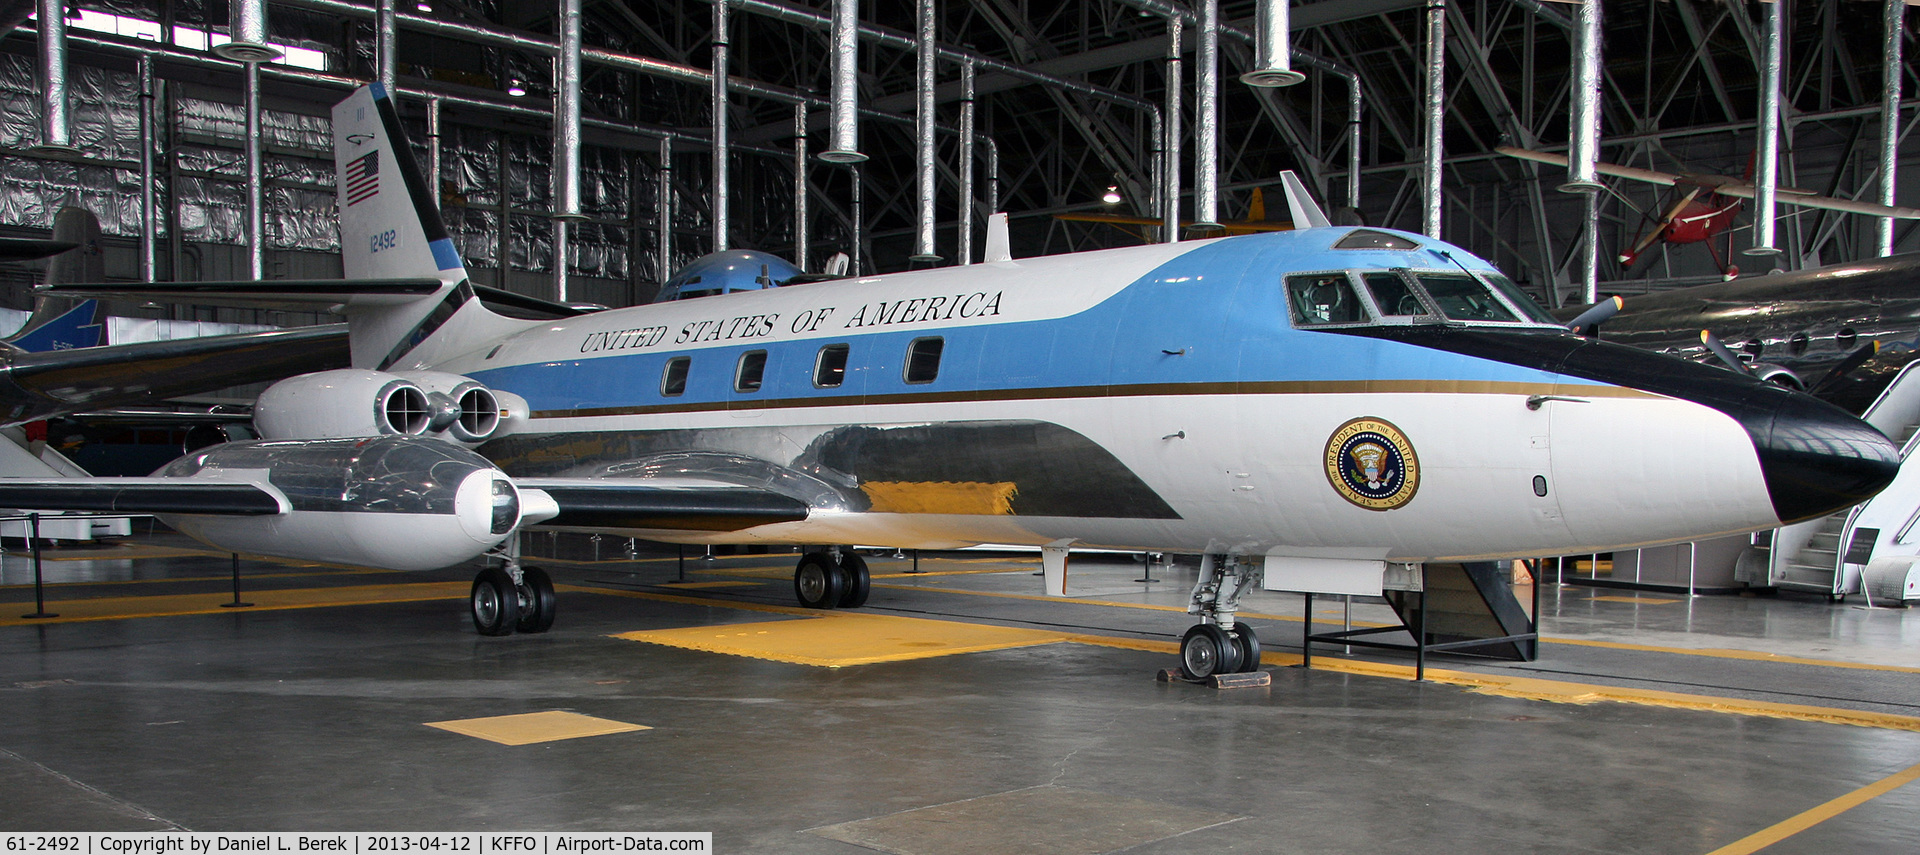 61-2492, 1961 Lockheed VC-140B-LM Jetstar C/N 1329-5031, This handsome plane carried several US presidents during her 26-year career.